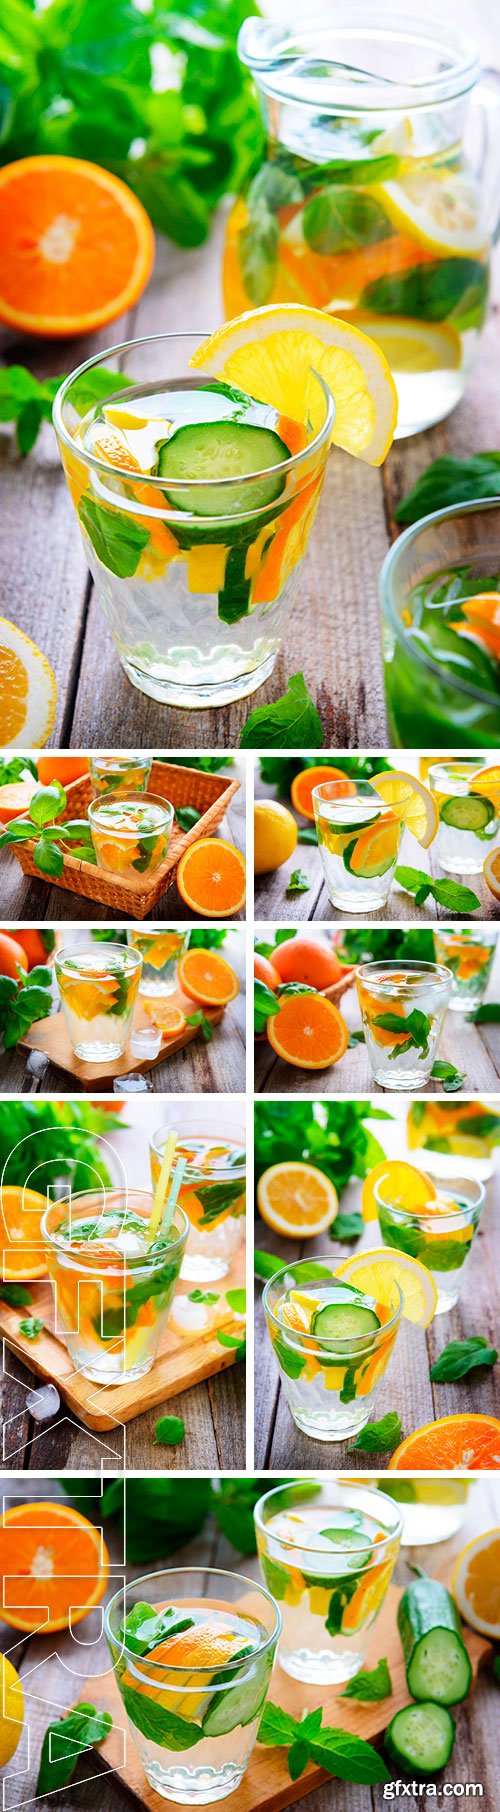 Stock Photos - A glass of orange drink with basil